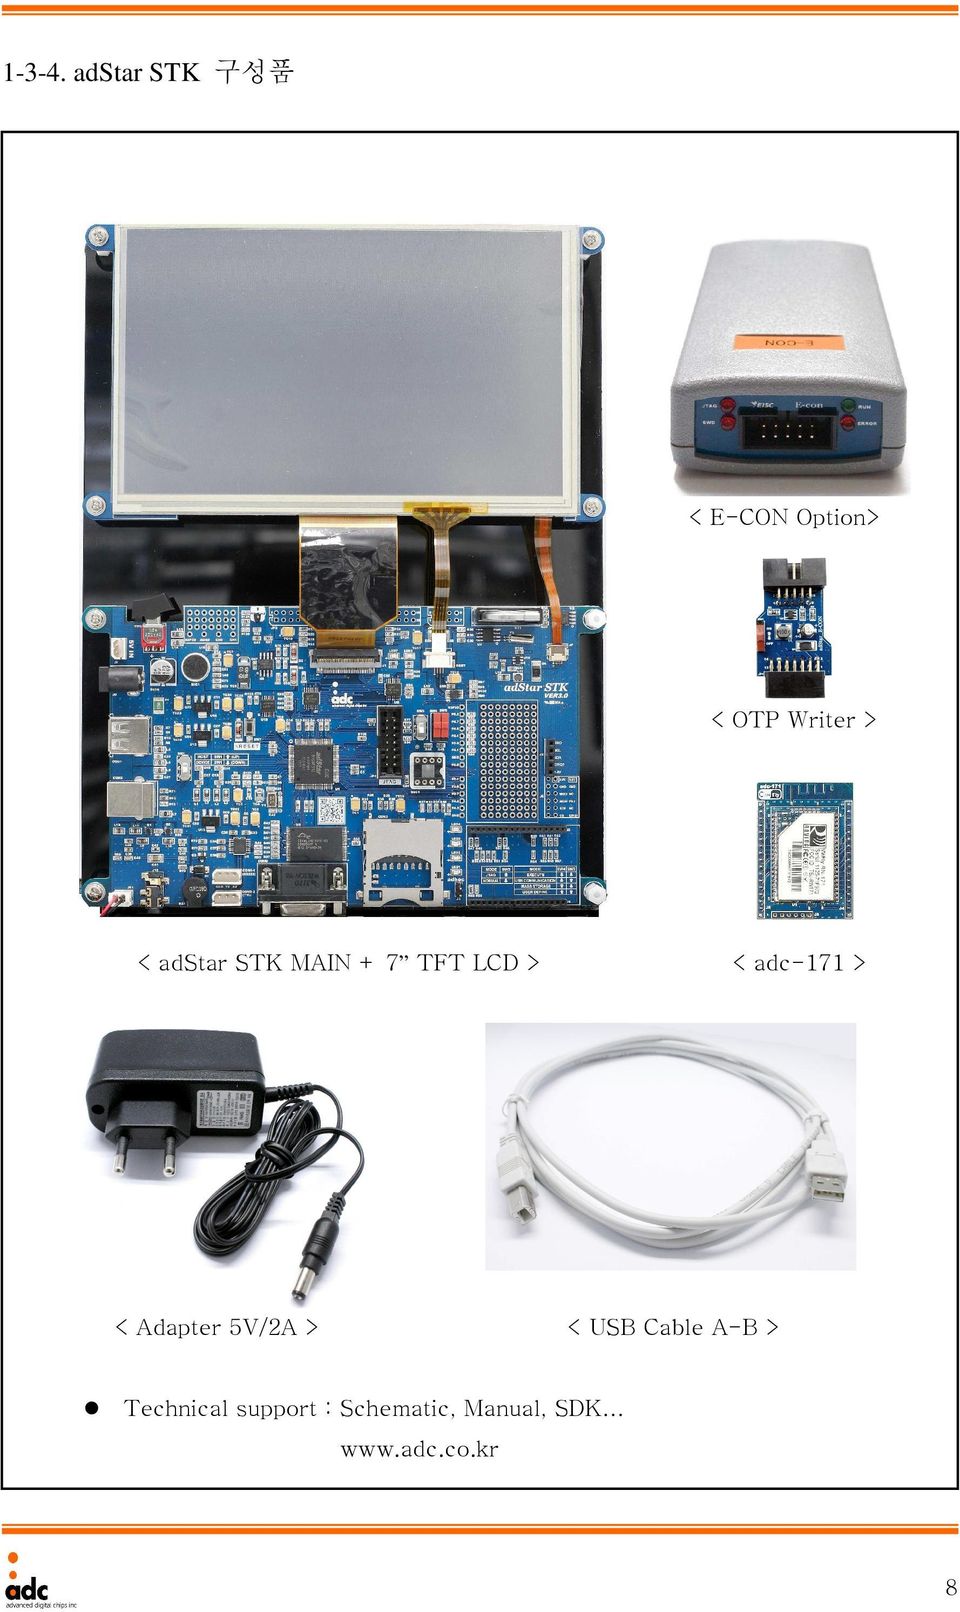 + 7 TFT LCD > < Adapter 5V/2A > < adc-171